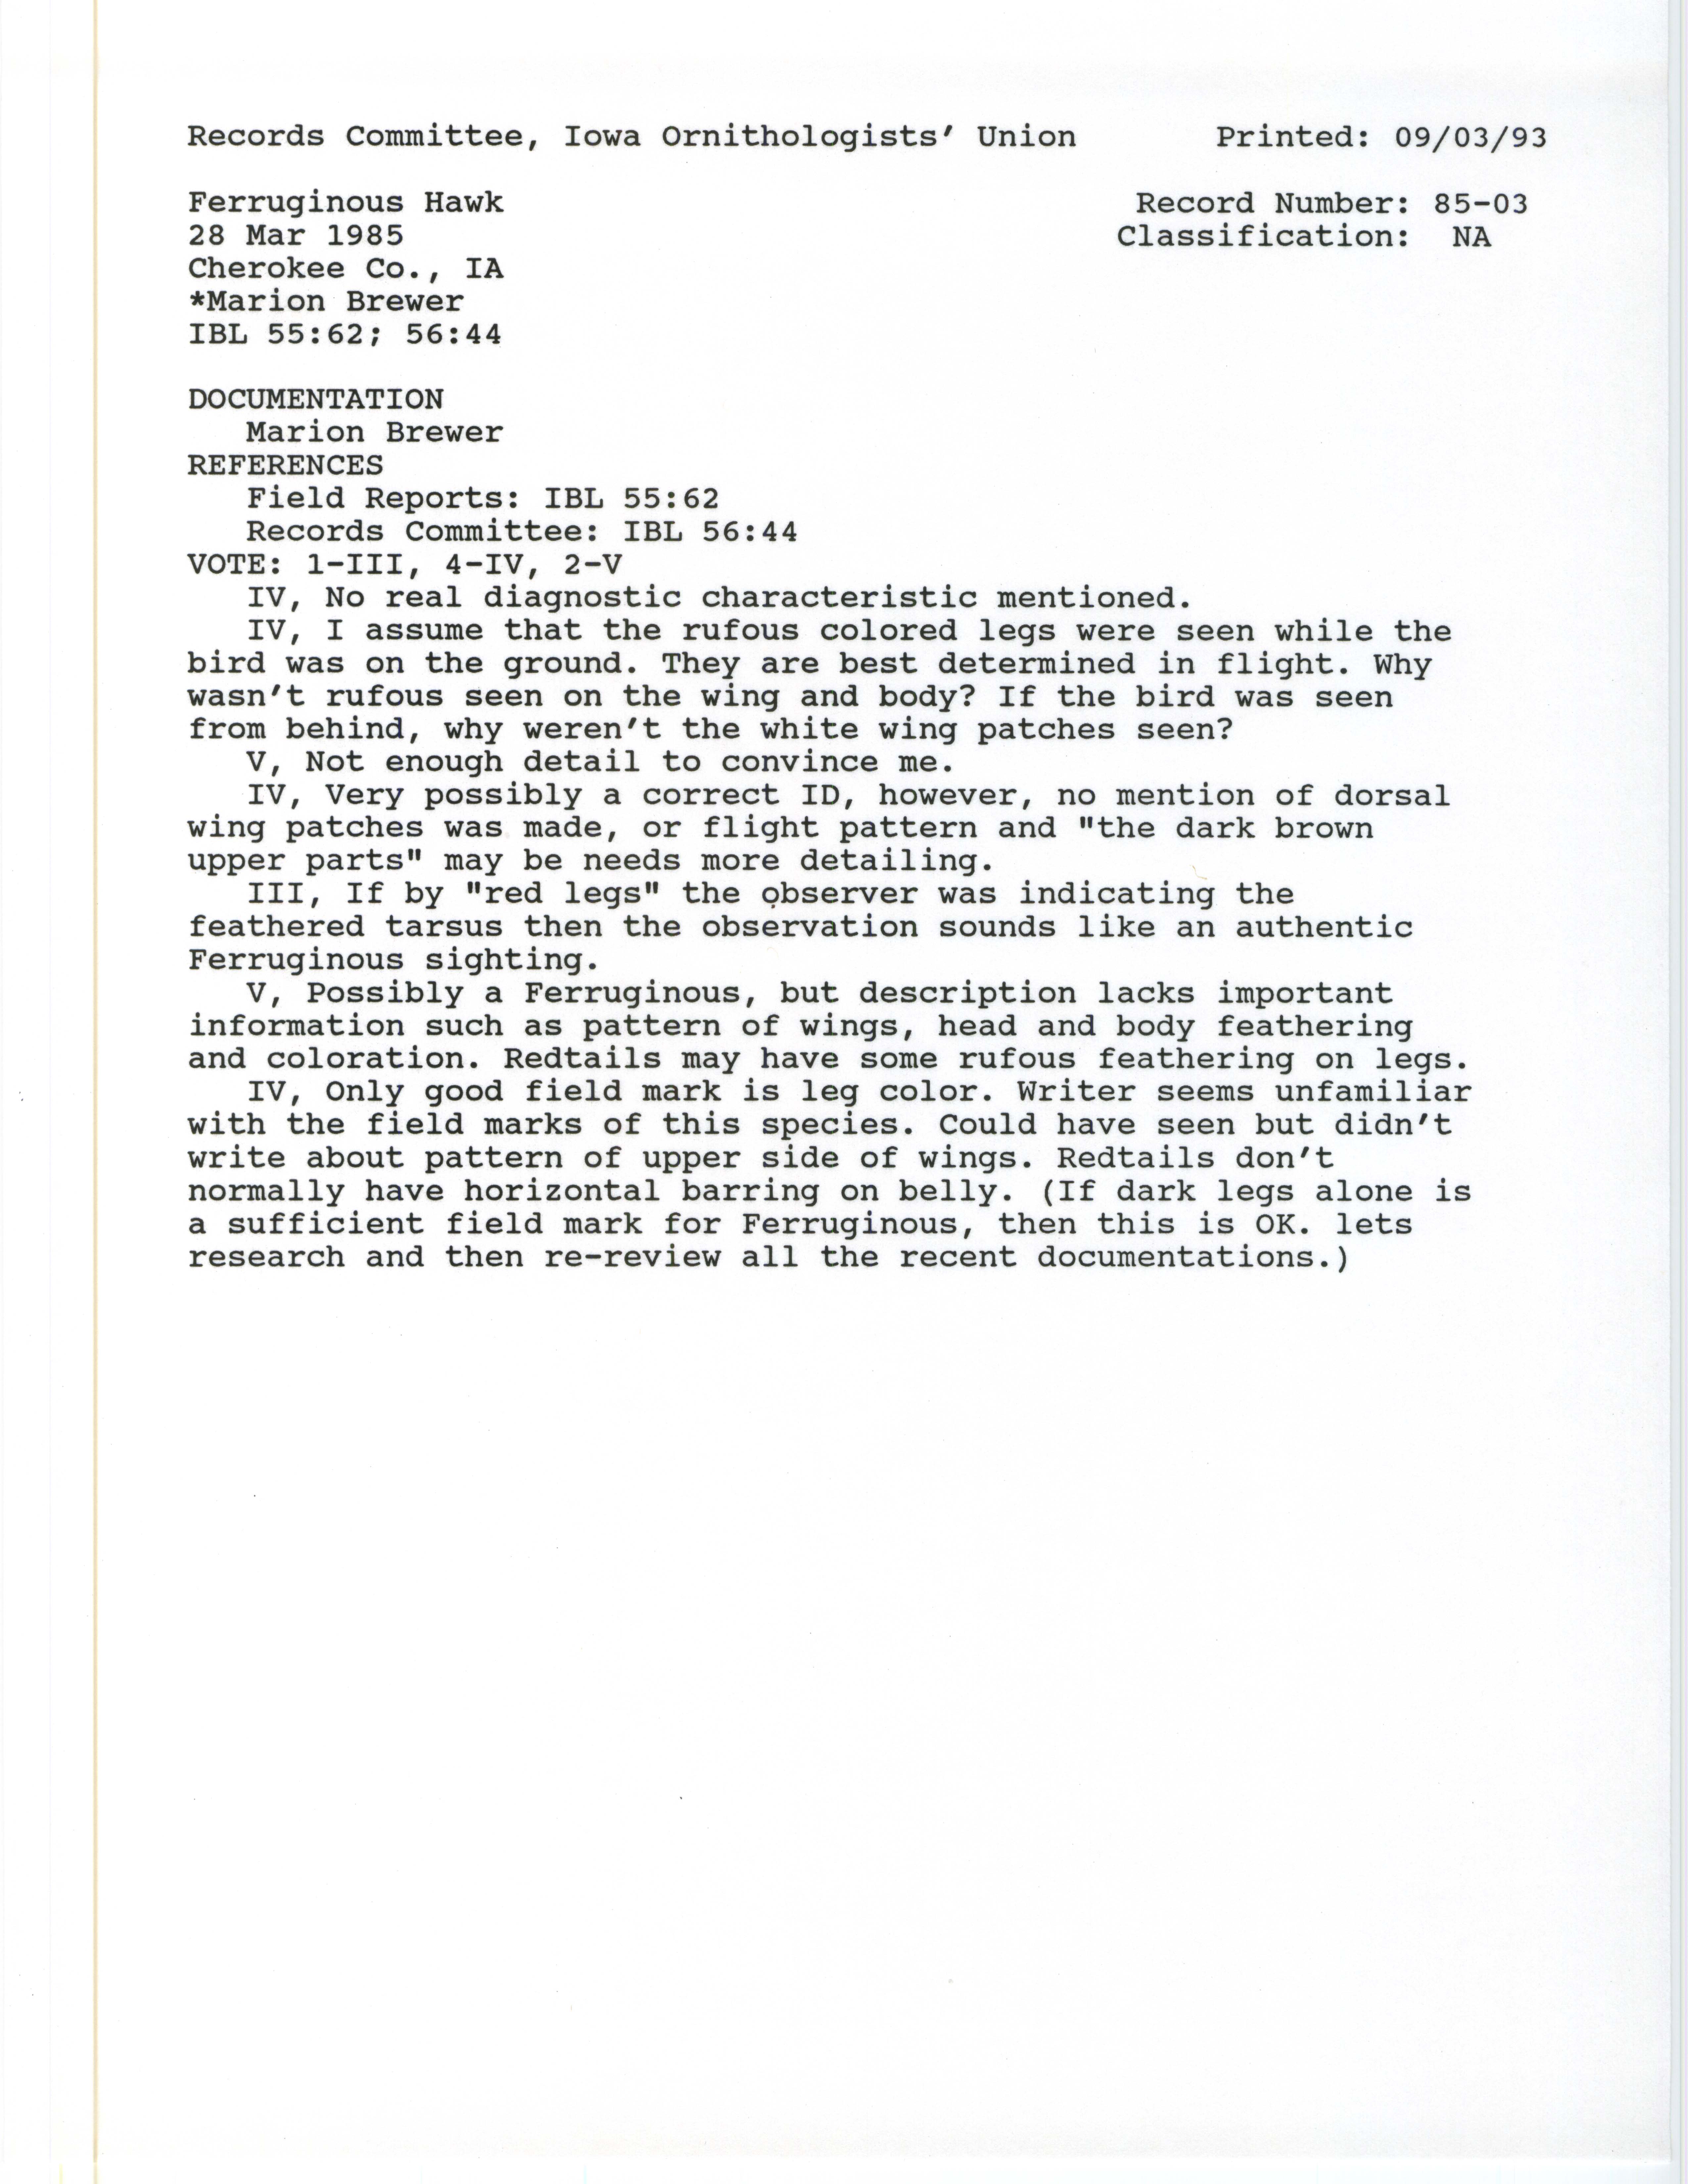 Records Committee review for rare bird sighting of Ferruginous Hawk in Cherokee County, 1985